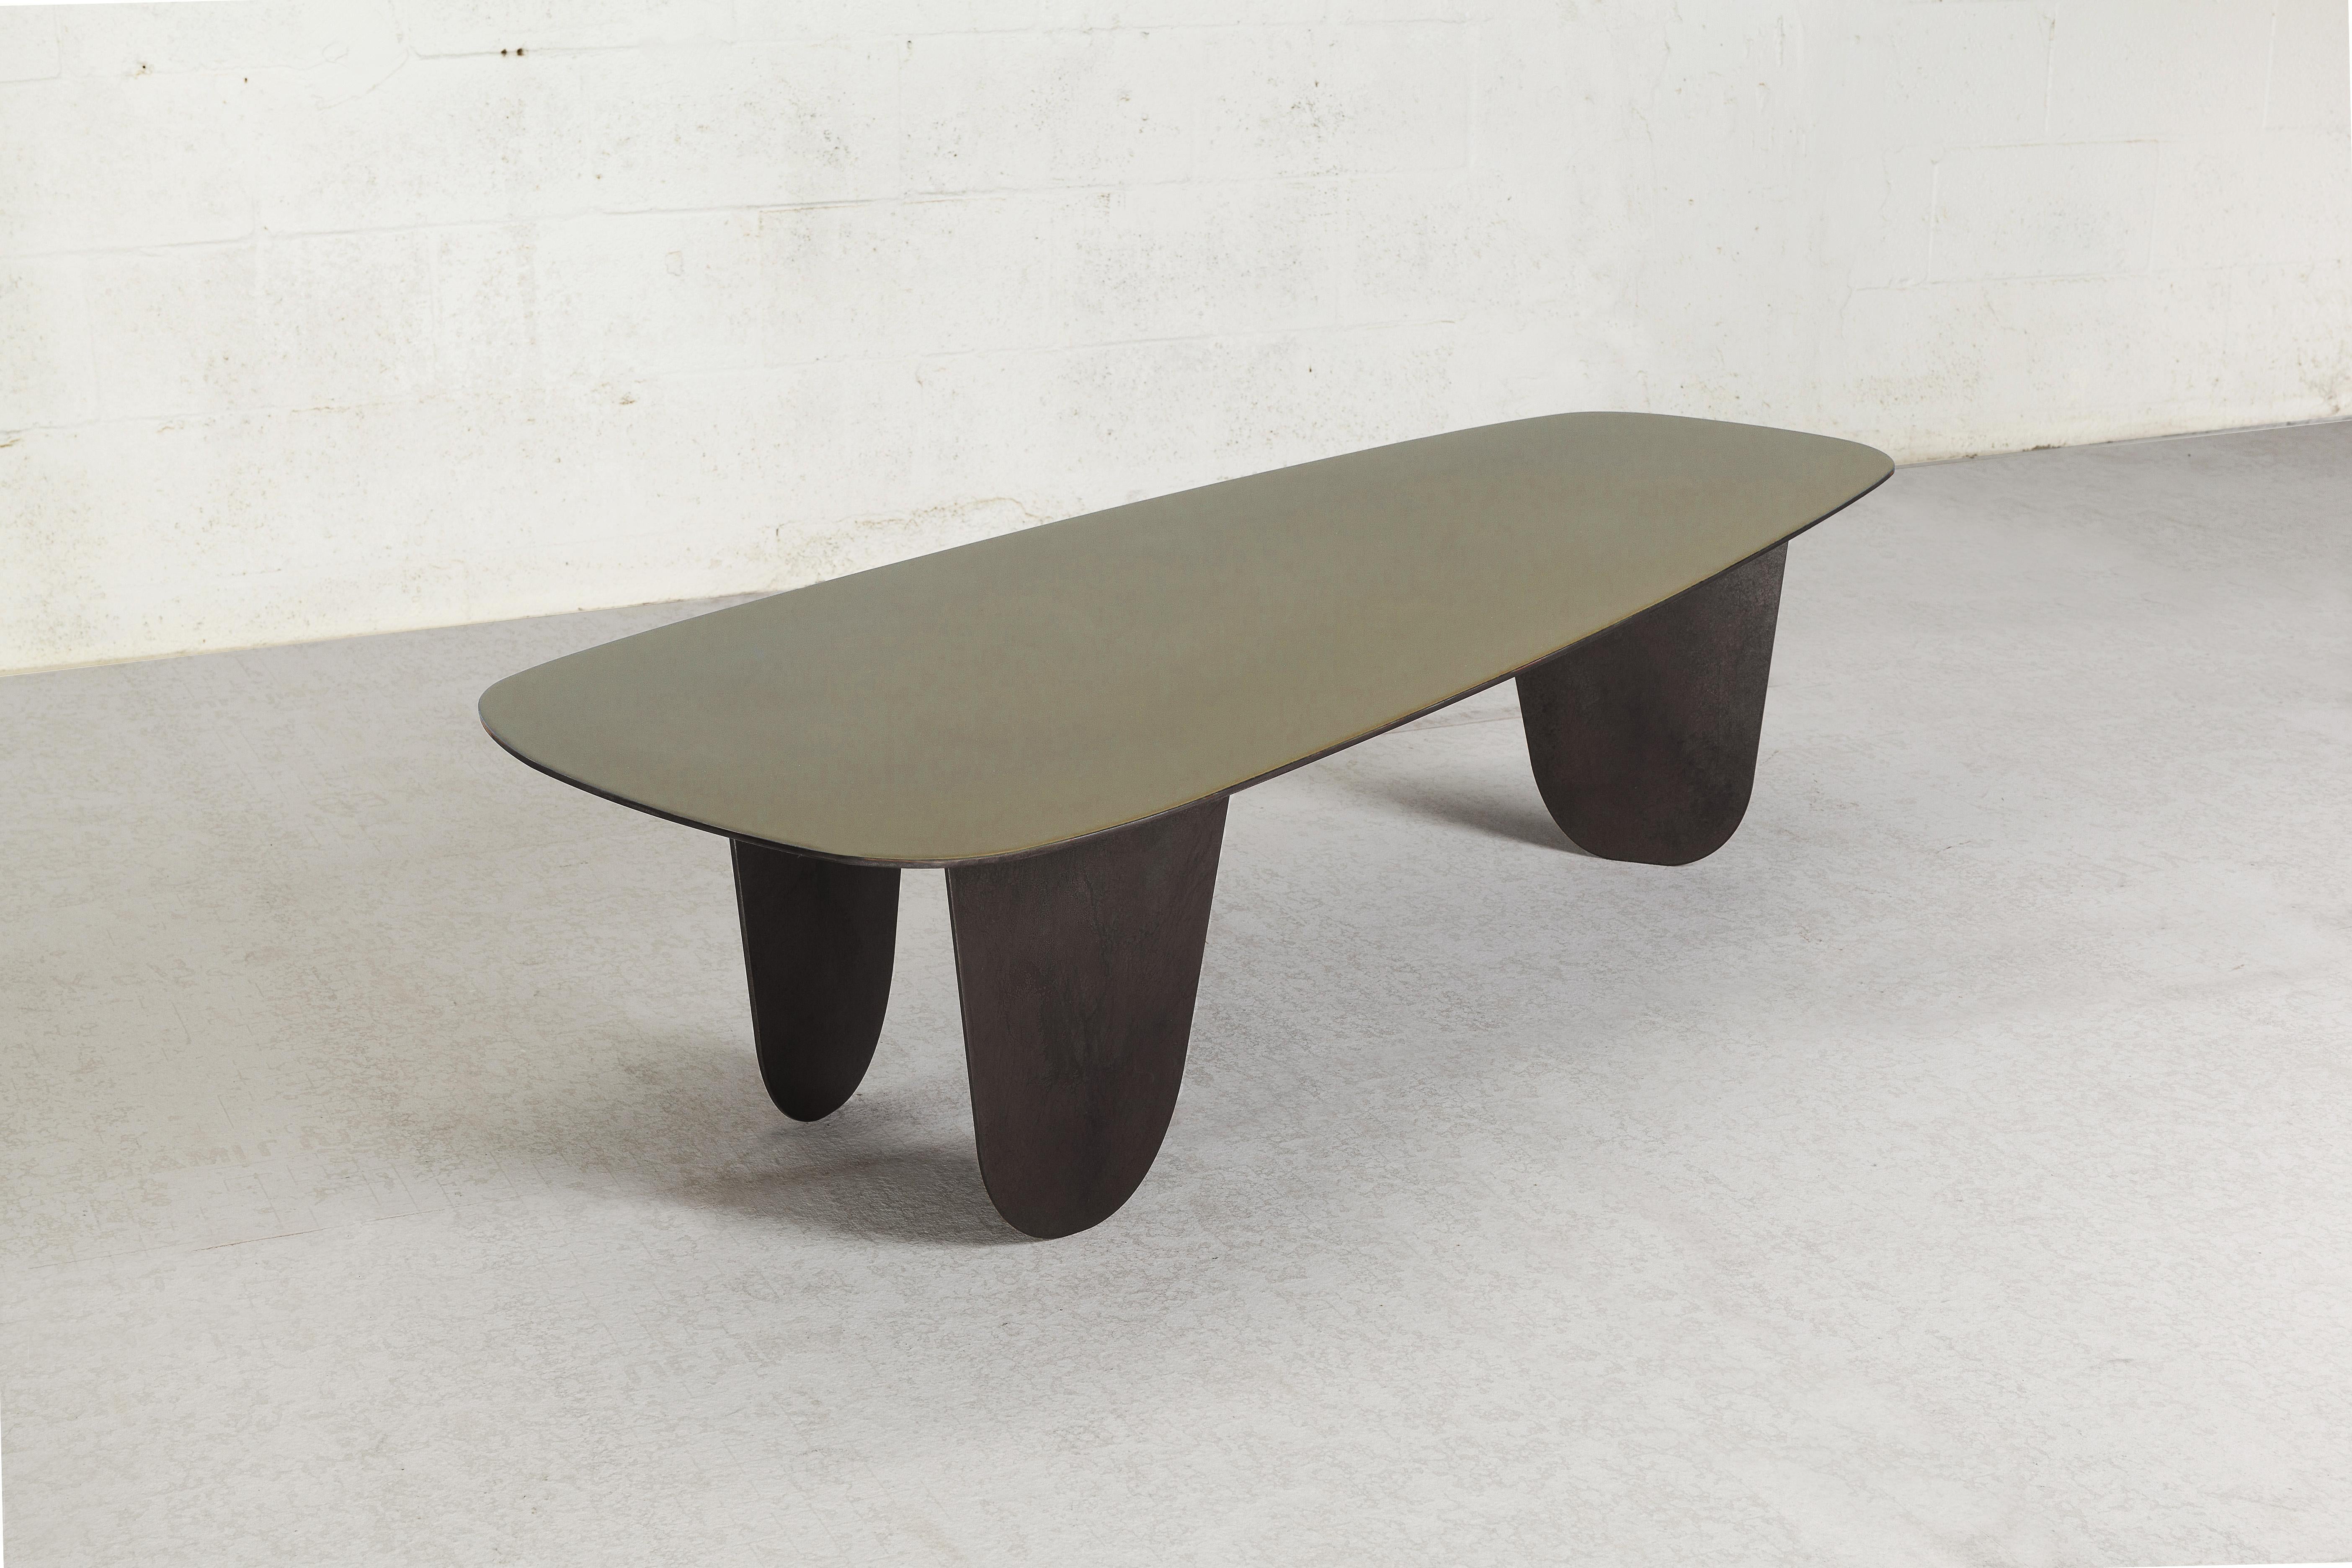 Contemporary Freeform Minimalist Steel and Resin Low Tables by Vivian Carbonell (Patiniert) im Angebot